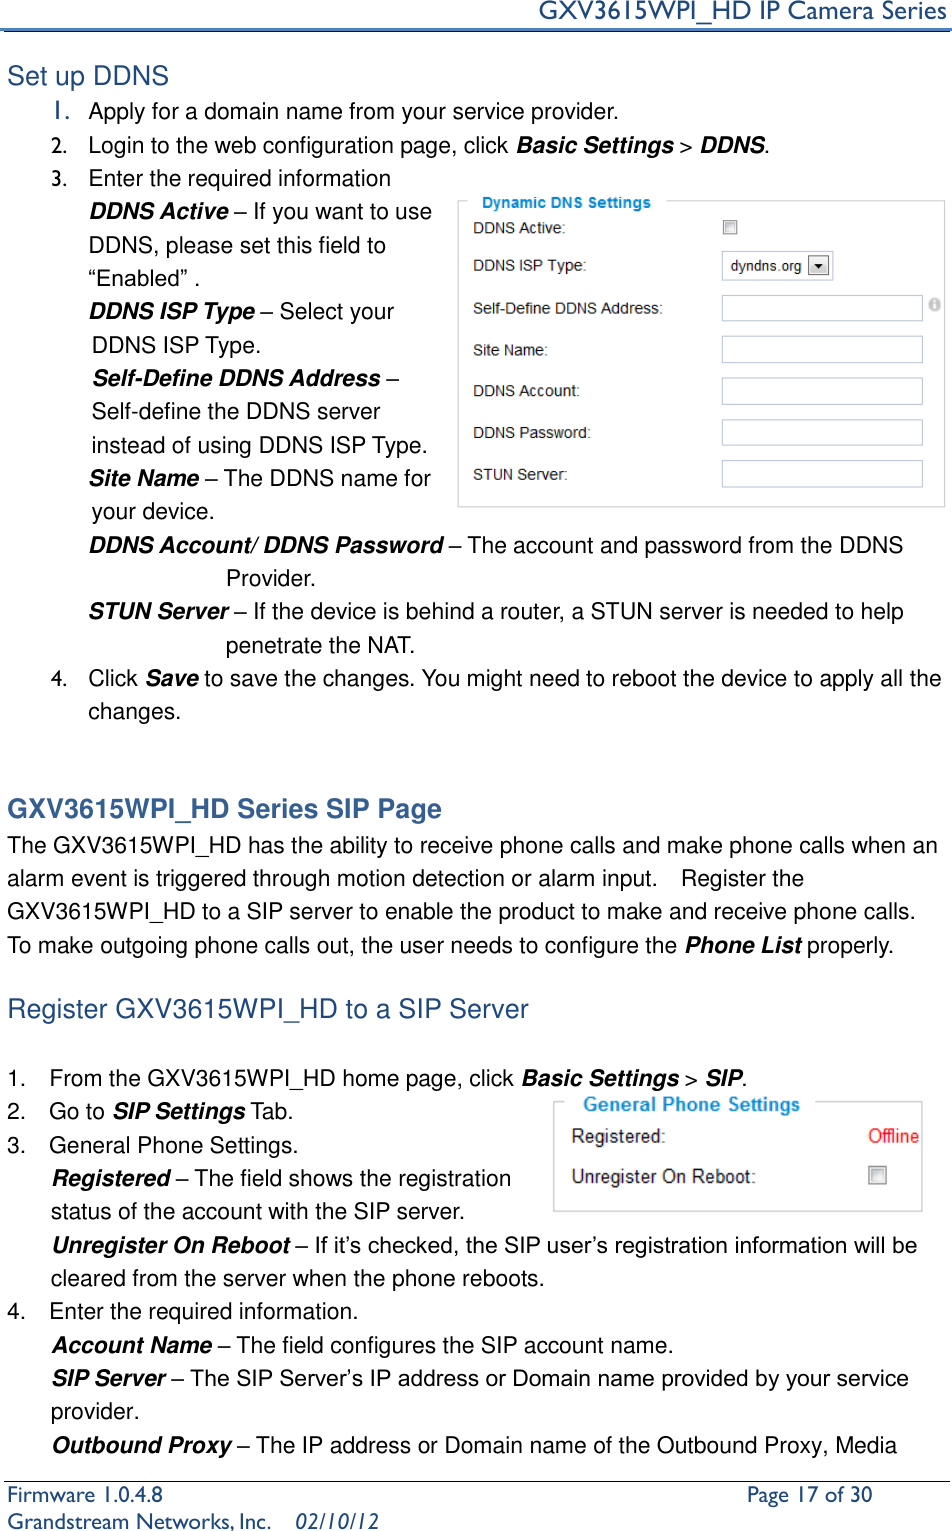     GXV3615WPI_HD IP Camera Series Firmware 1.0.4.8                                                   Page 17 of 30     Grandstream Networks, Inc.  02/10/12  Set up DDNS 1. Apply for a domain name from your service provider. 2.  Login to the web configuration page, click Basic Settings &gt; DDNS.     3.  Enter the required information   DDNS Active – If you want to use DDNS, please set this field to “Enabled” .        DDNS ISP Type – Select your DDNS ISP Type. Self-Define DDNS Address – Self-define the DDNS server instead of using DDNS ISP Type.        Site Name – The DDNS name for your device.        DDNS Account/ DDNS Password – The account and password from the DDNS             Provider.        STUN Server – If the device is behind a router, a STUN server is needed to help penetrate the NAT. 4.  Click Save to save the changes. You might need to reboot the device to apply all the changes.     GXV3615WPI_HD Series SIP Page The GXV3615WPI_HD has the ability to receive phone calls and make phone calls when an alarm event is triggered through motion detection or alarm input.    Register the GXV3615WPI_HD to a SIP server to enable the product to make and receive phone calls.   To make outgoing phone calls out, the user needs to configure the Phone List properly.  Register GXV3615WPI_HD to a SIP Server  1.    From the GXV3615WPI_HD home page, click Basic Settings &gt; SIP. 2.    Go to SIP Settings Tab. 3.    General Phone Settings. Registered – The field shows the registration status of the account with the SIP server.   Unregister On Reboot – If it’s checked, the SIP user’s registration information will be cleared from the server when the phone reboots. 4.    Enter the required information. Account Name – The field configures the SIP account name. SIP Server – The SIP Server’s IP address or Domain name provided by your service provider. Outbound Proxy – The IP address or Domain name of the Outbound Proxy, Media 